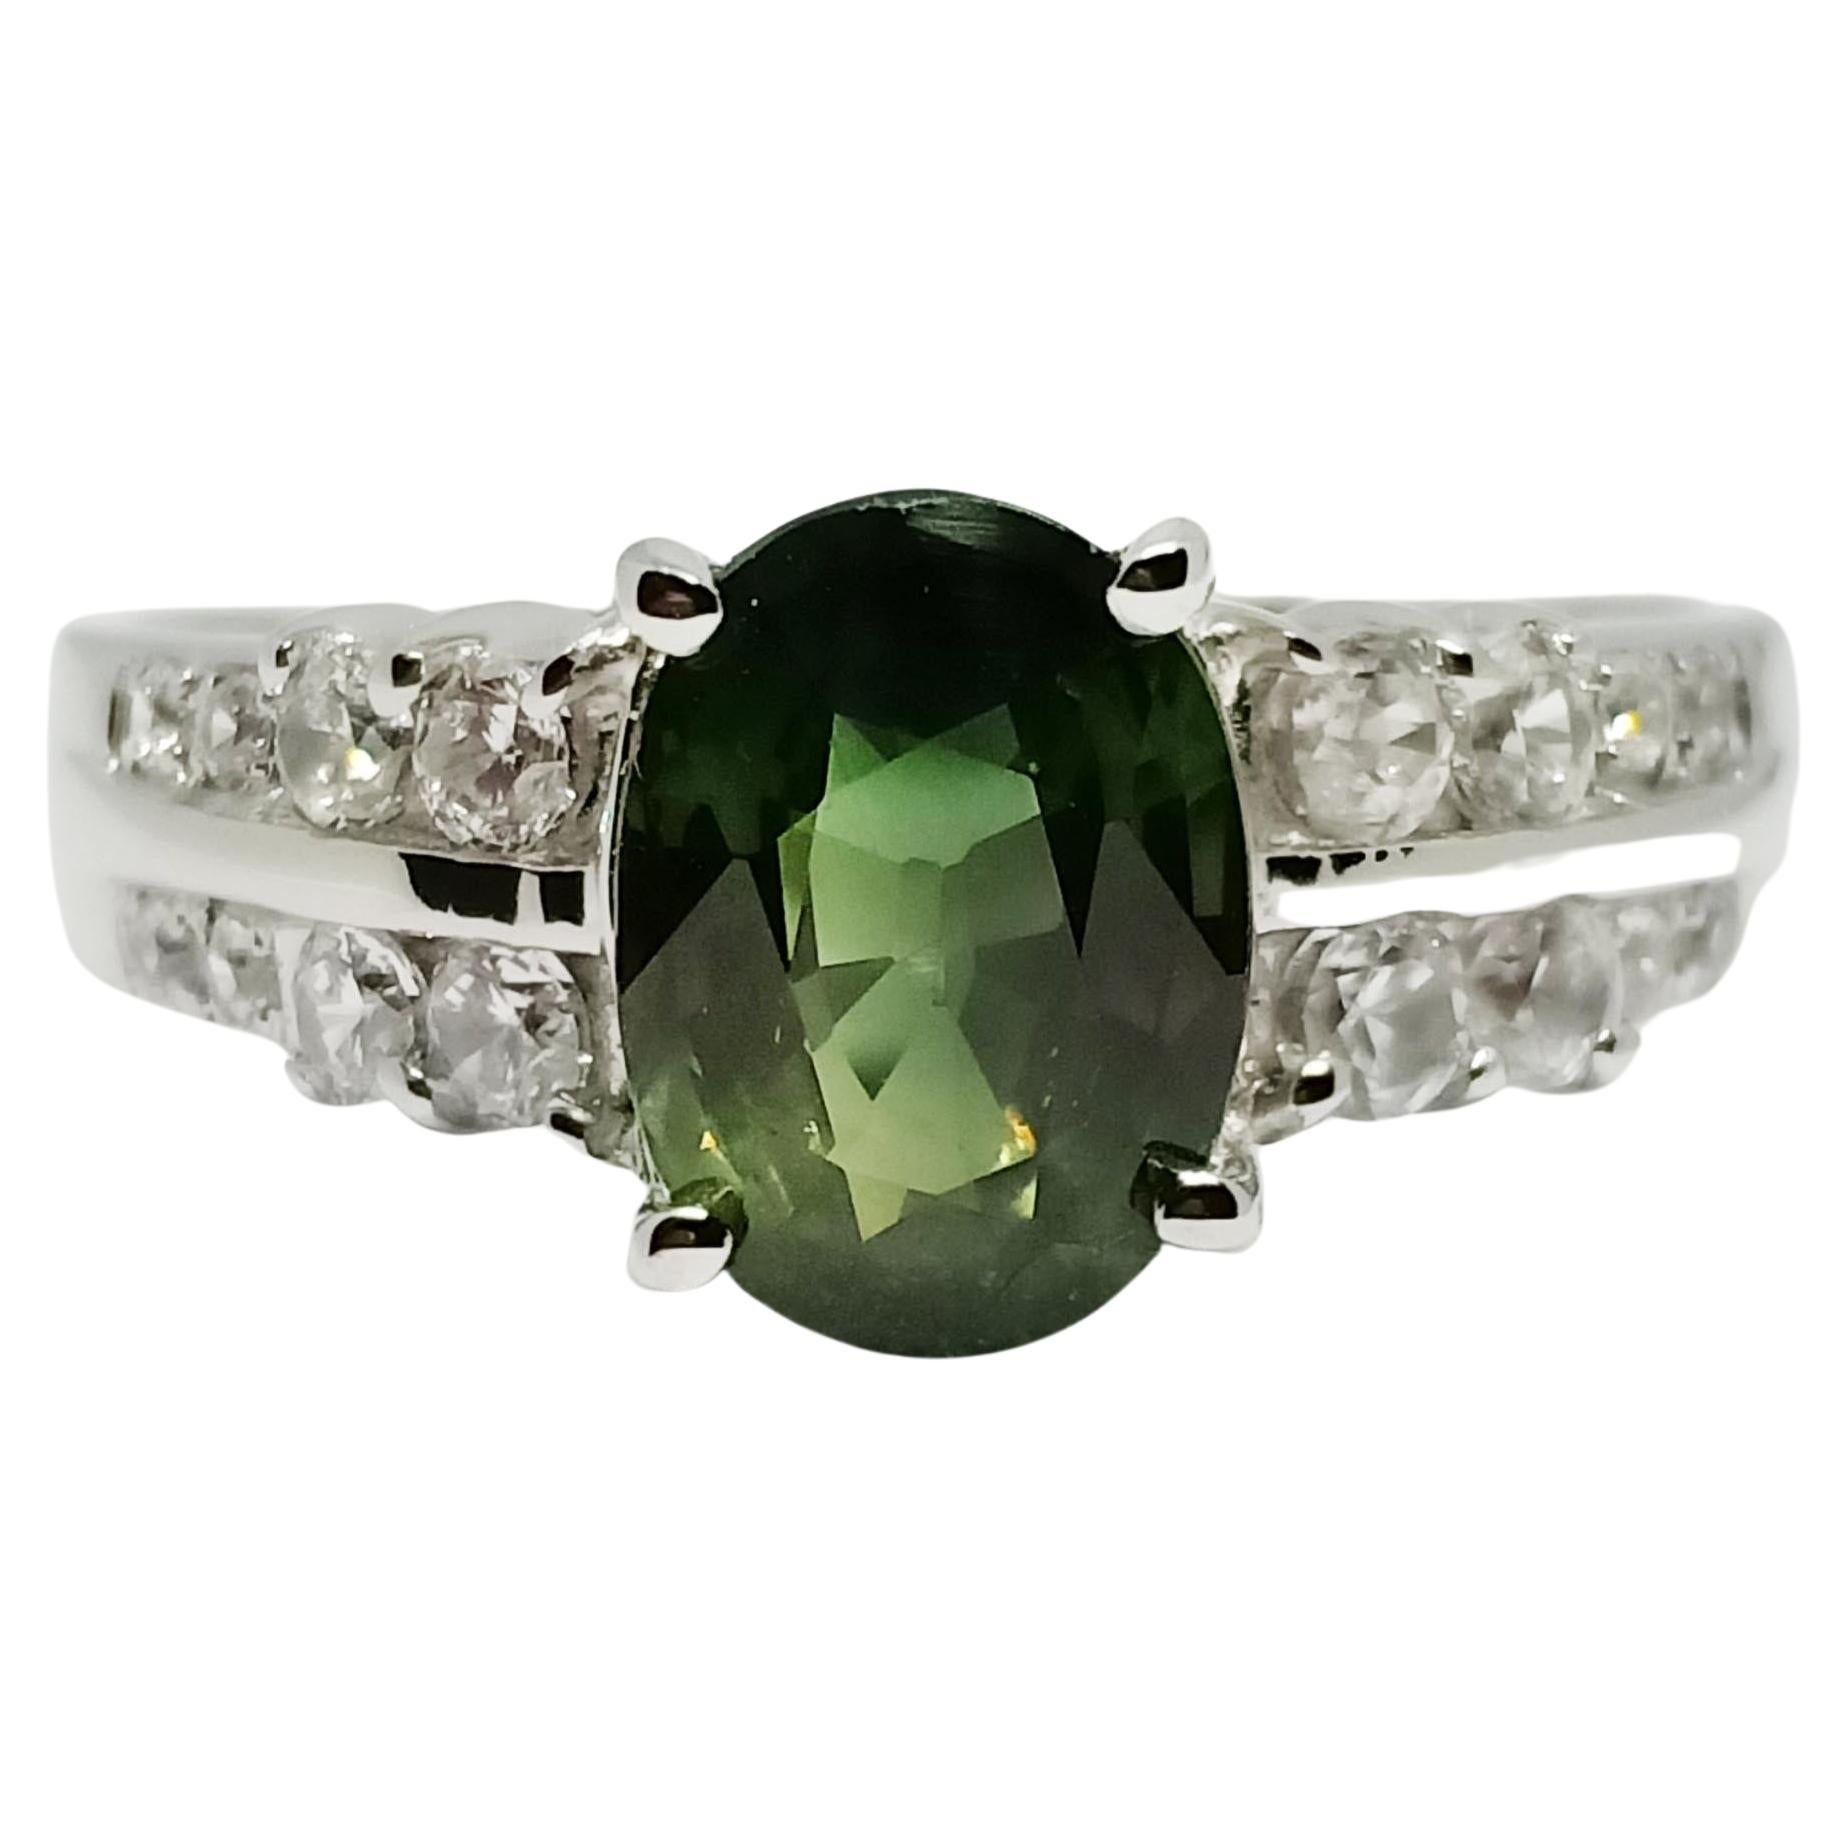 Green sapphire Only Heated 1.65cts 18WG plated over sterling silver For Sale